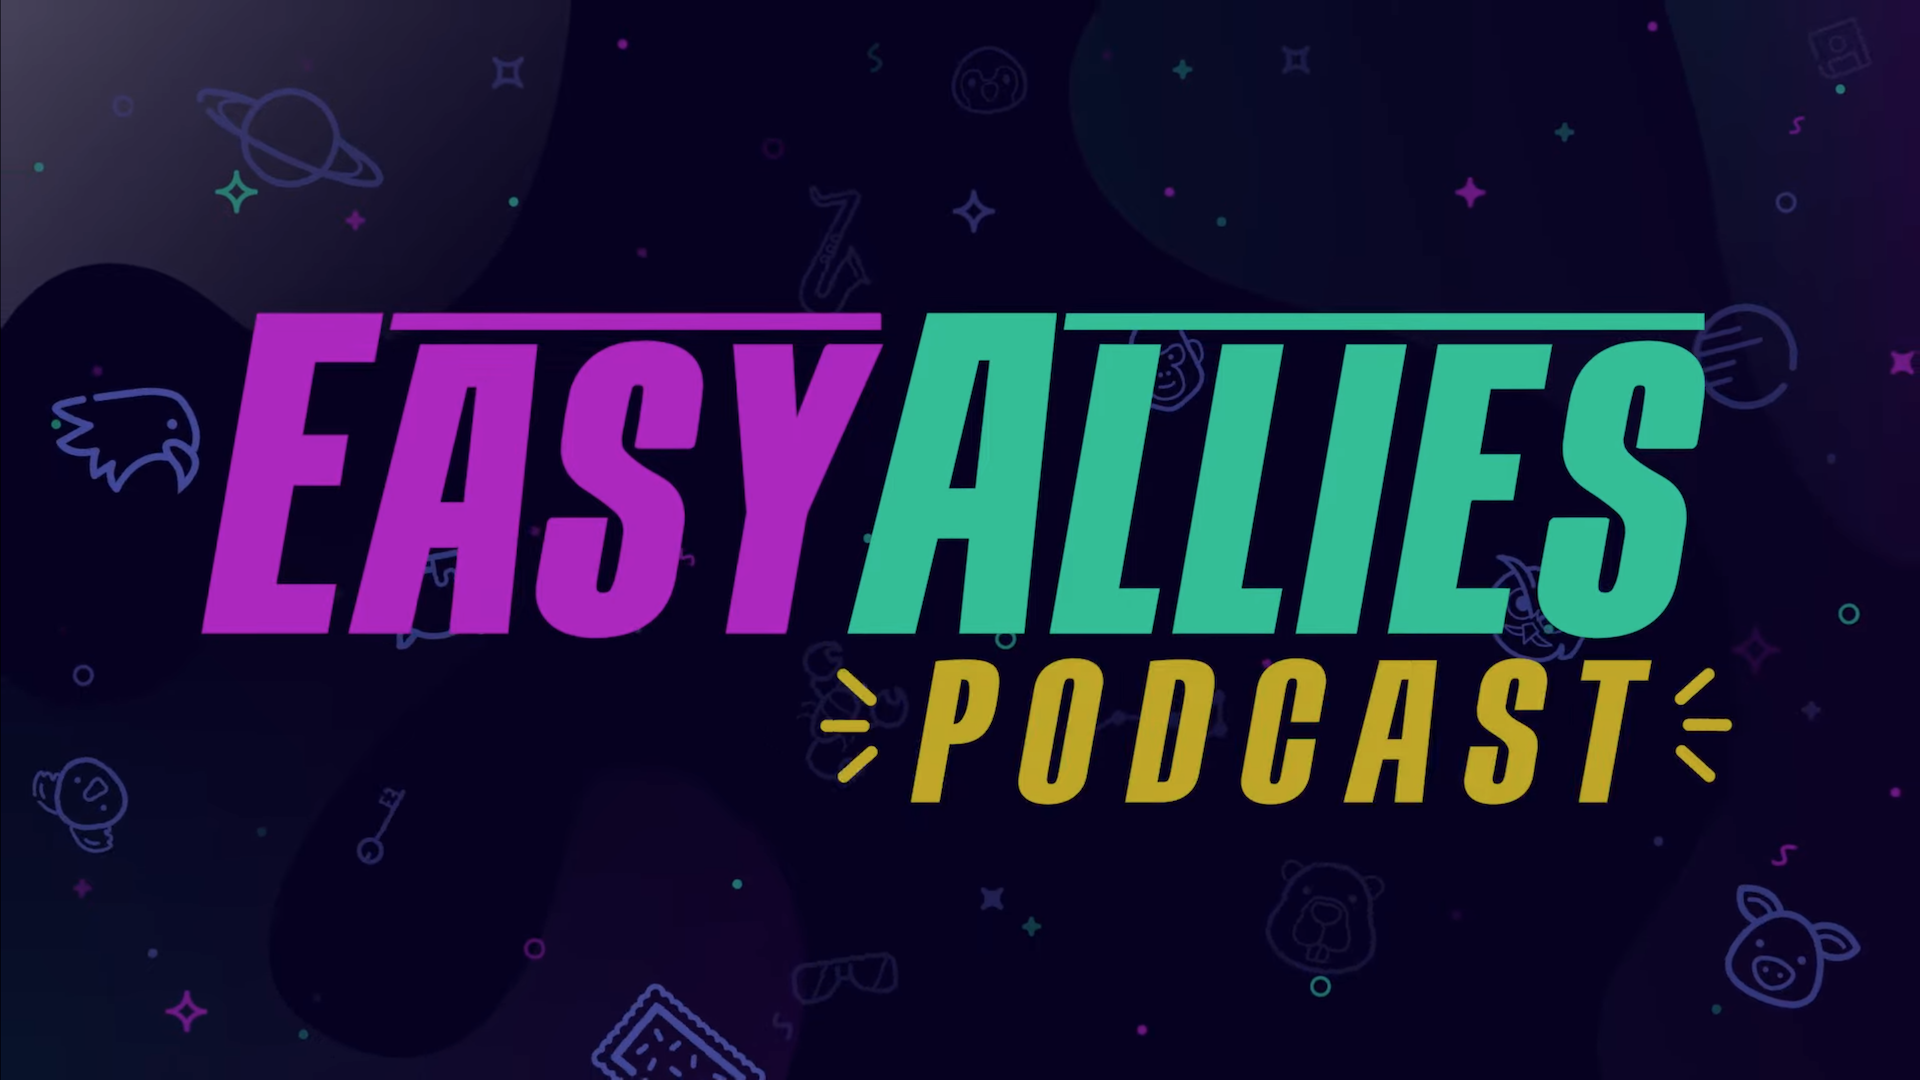 The Easy Allies Podcast